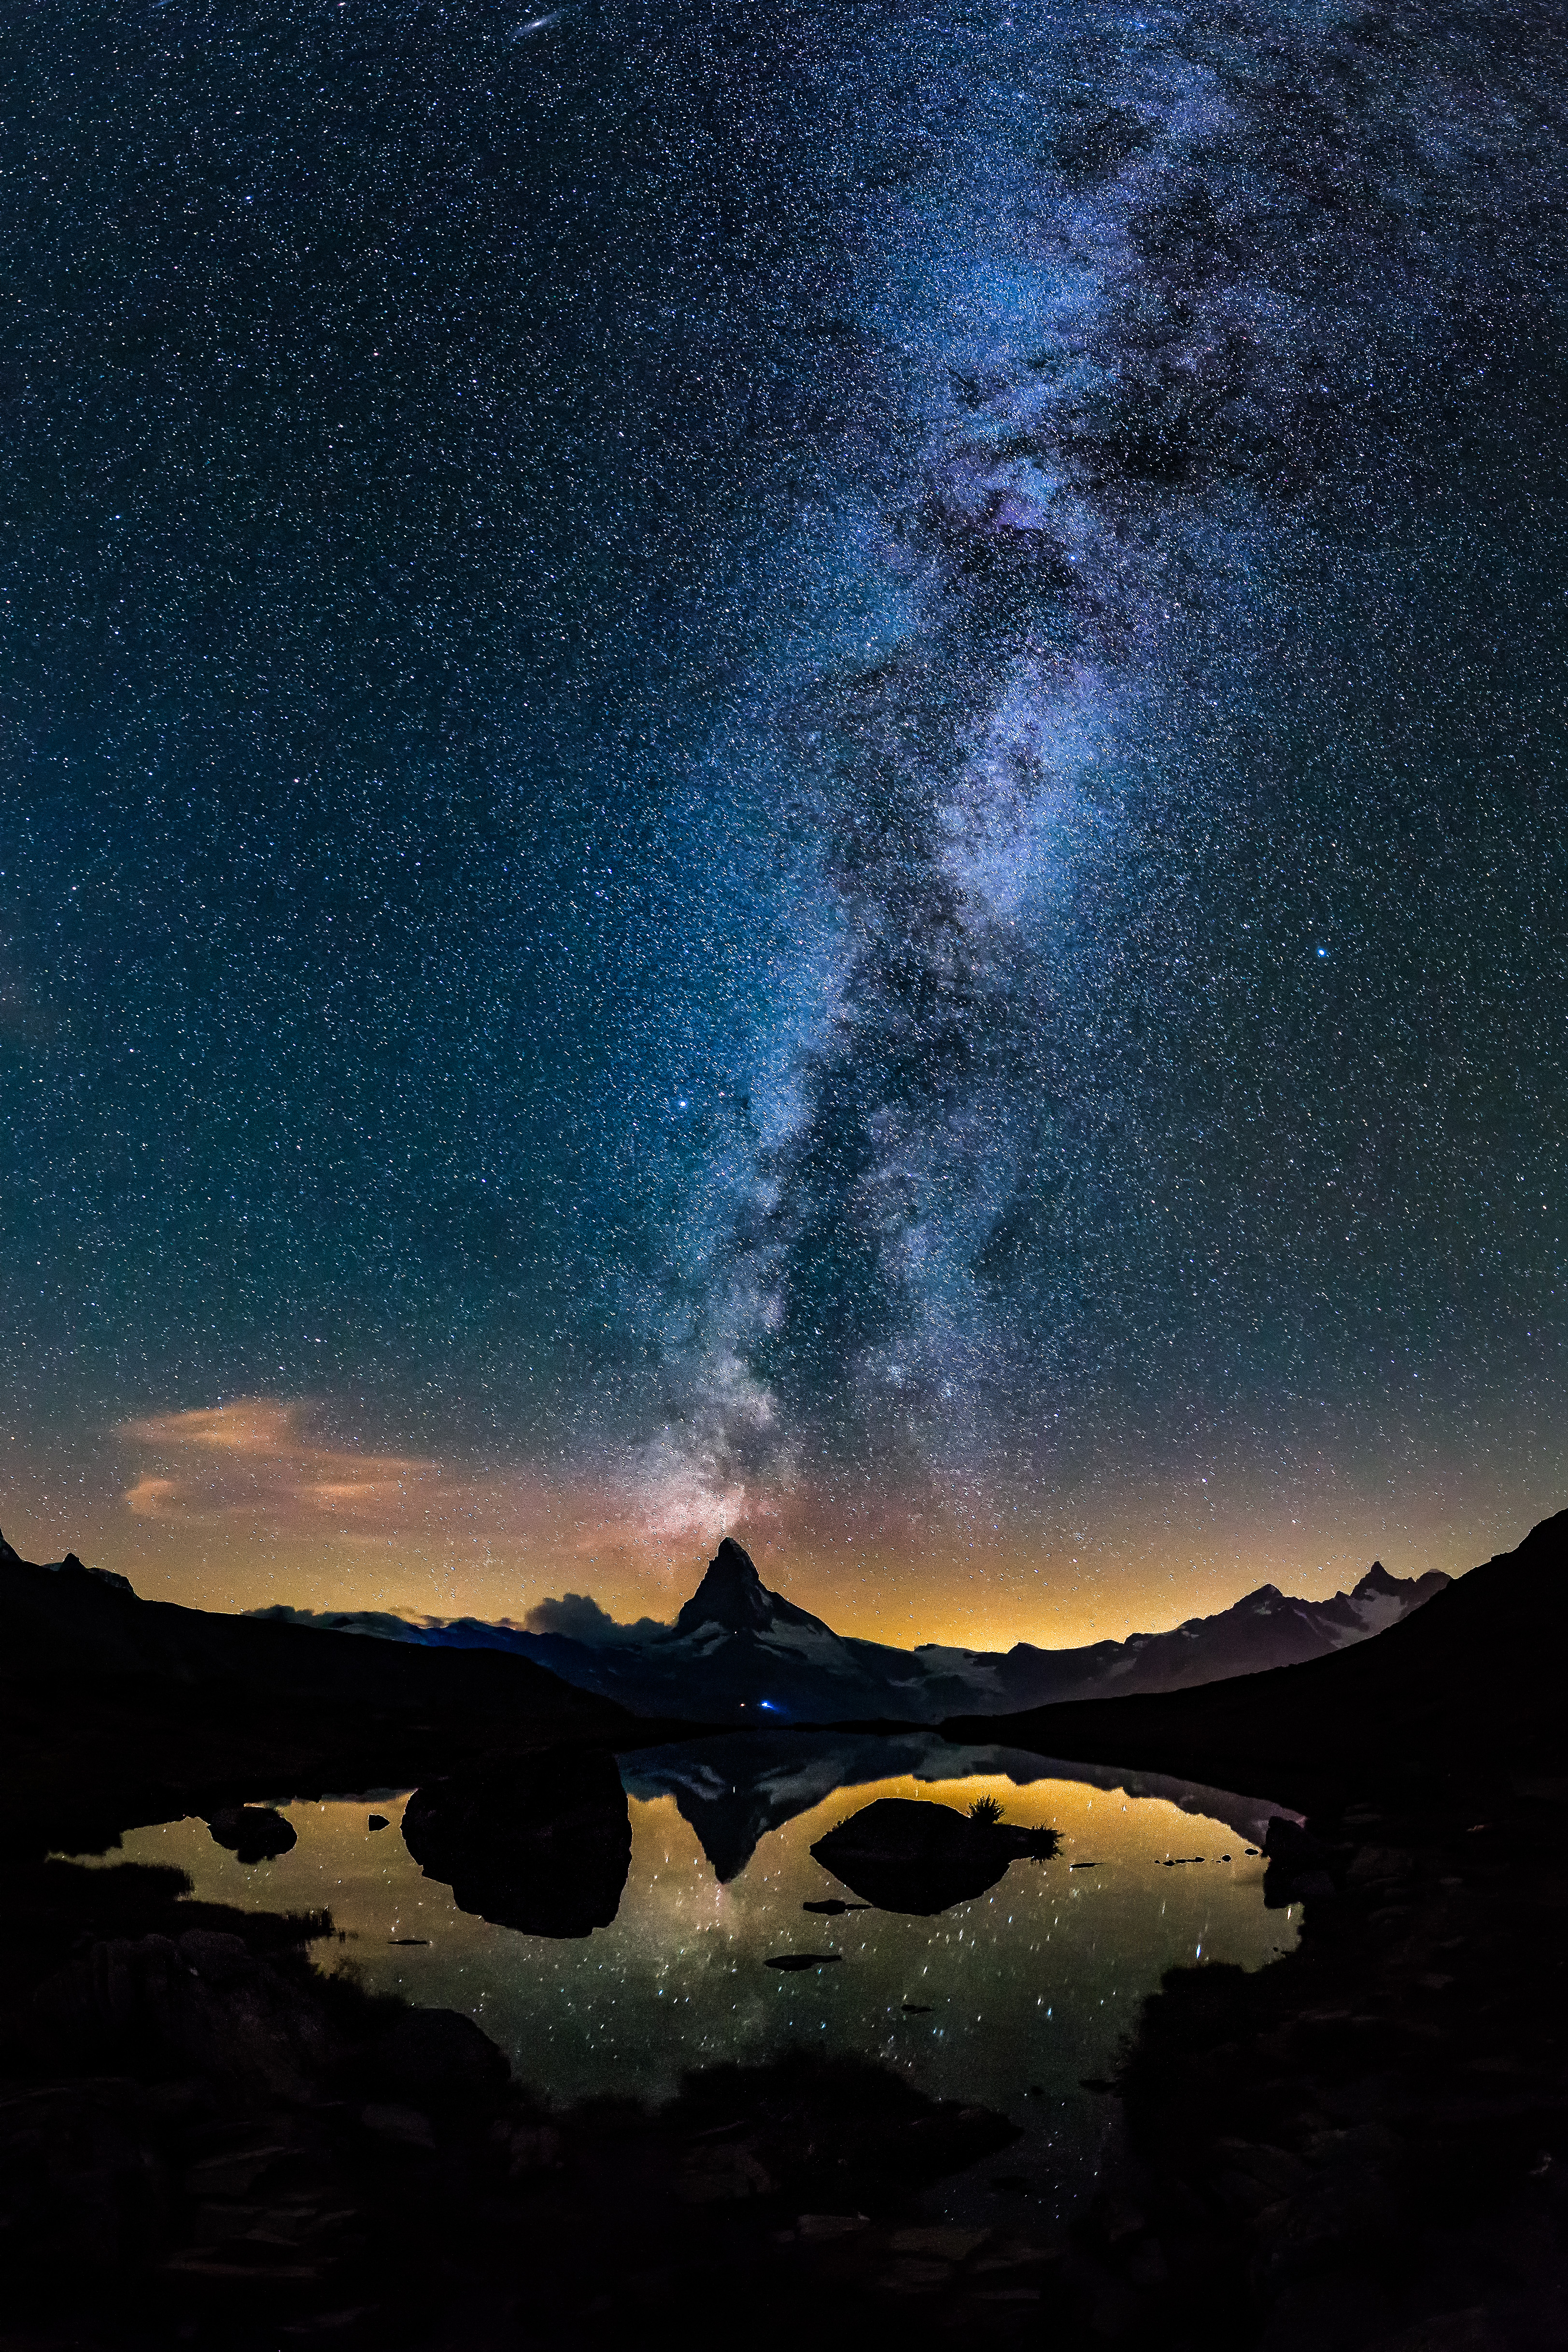 universe, nature, mountains, lake, starry sky High Definition image